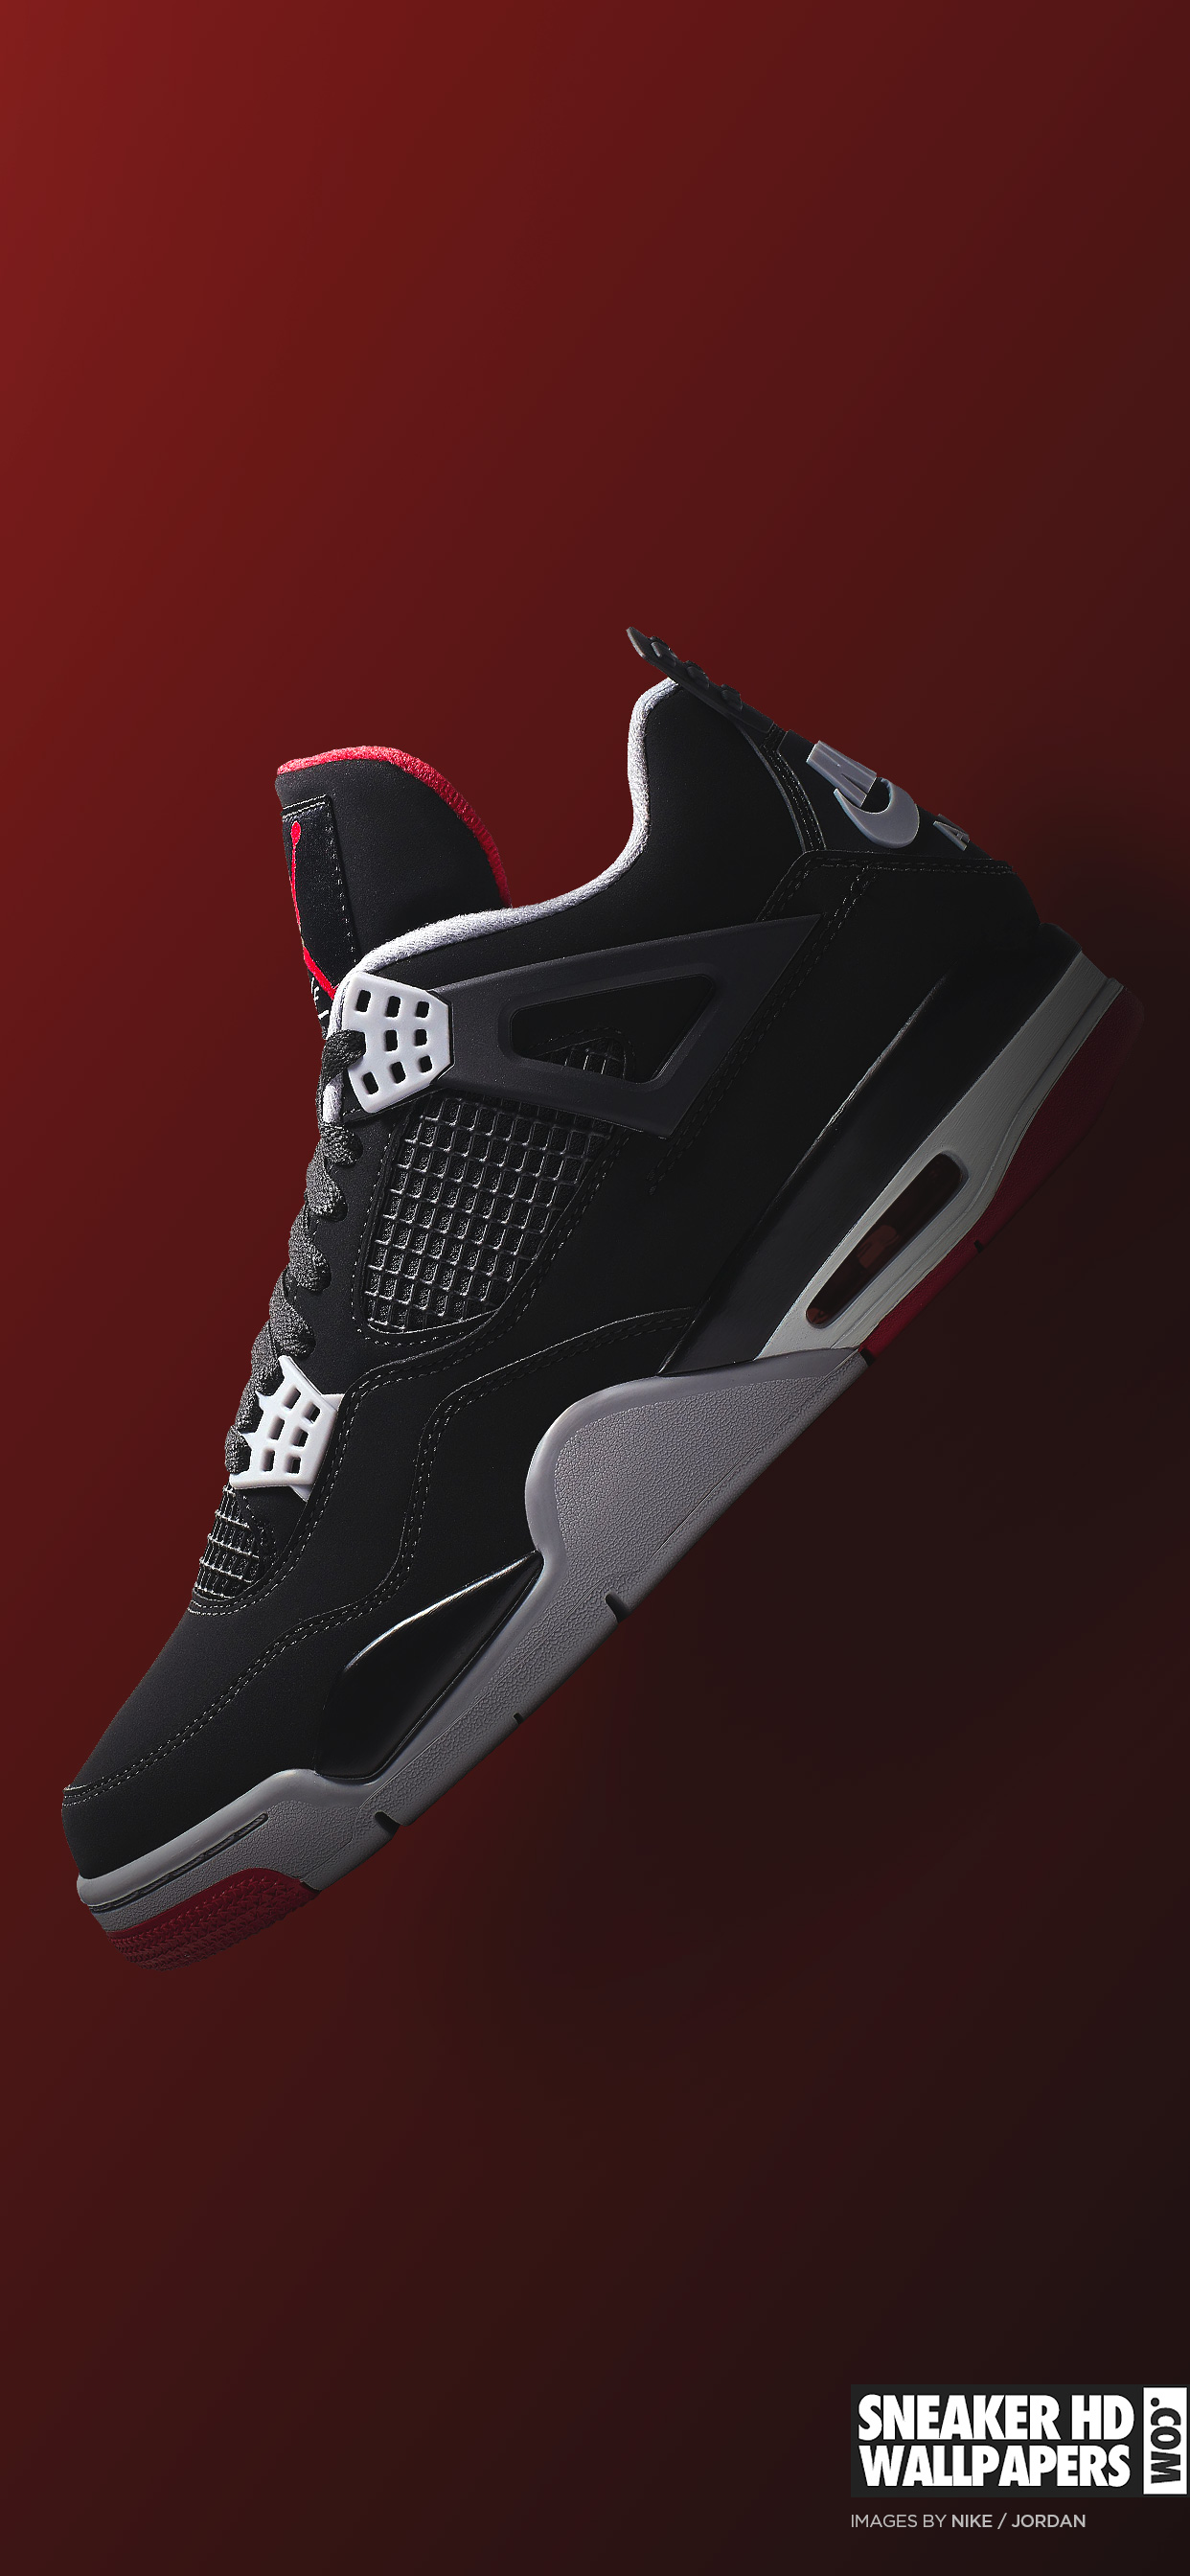 SneakerHDWallpaperscom Your favorite sneakers in HD and mobile 1242x2688